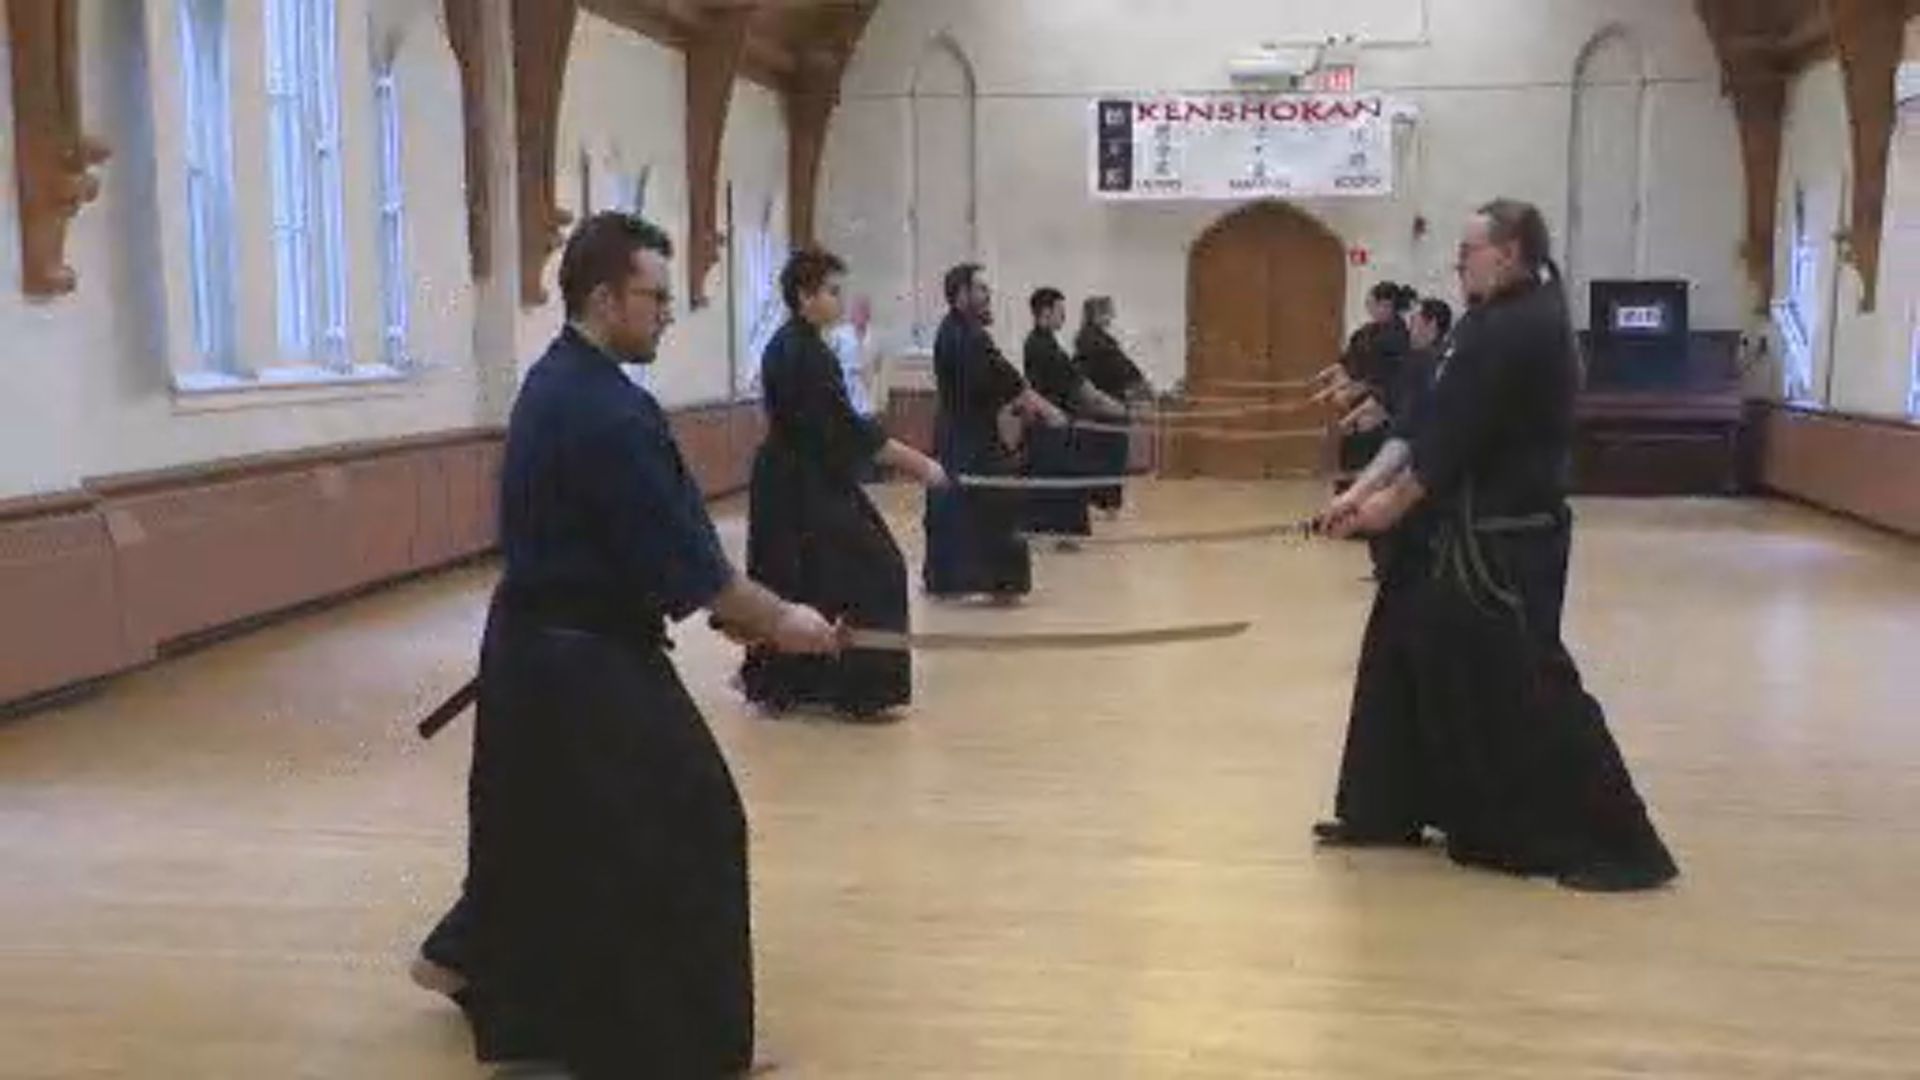 Iaido: A lesson in the ancient Japanese art of sword drawing